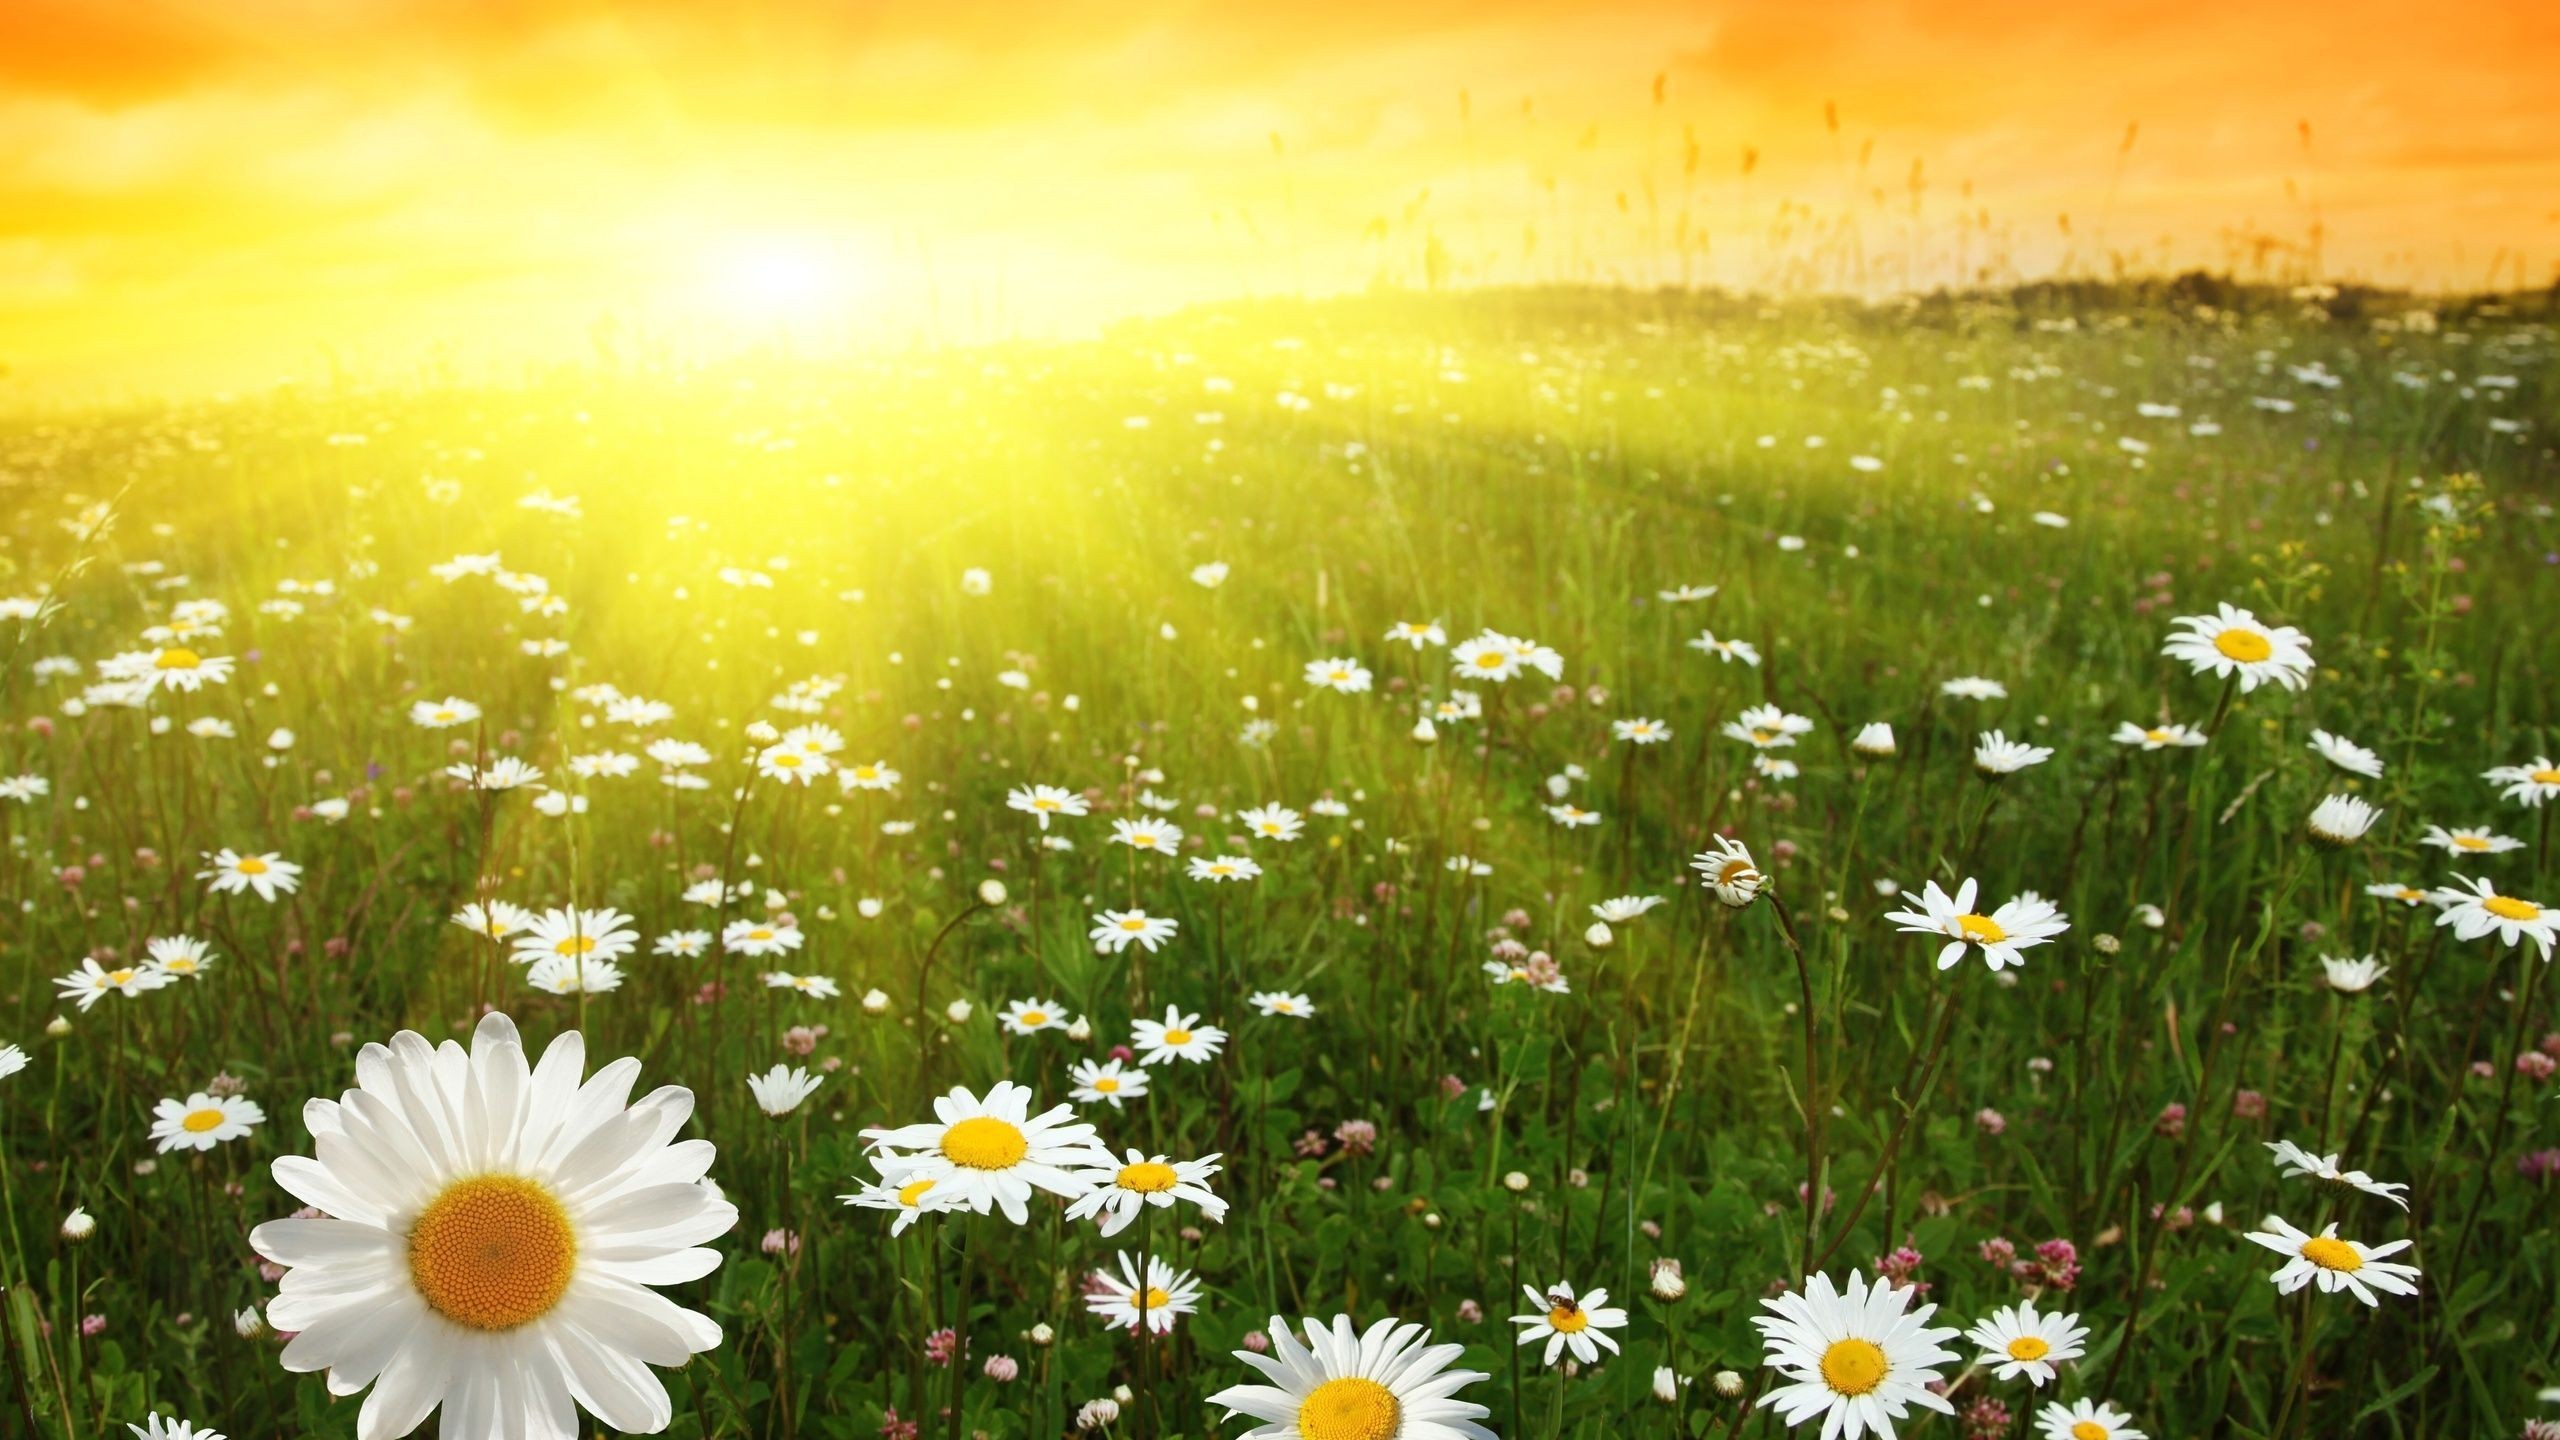 Sunny background ·① Download free awesome High Resolution wallpapers